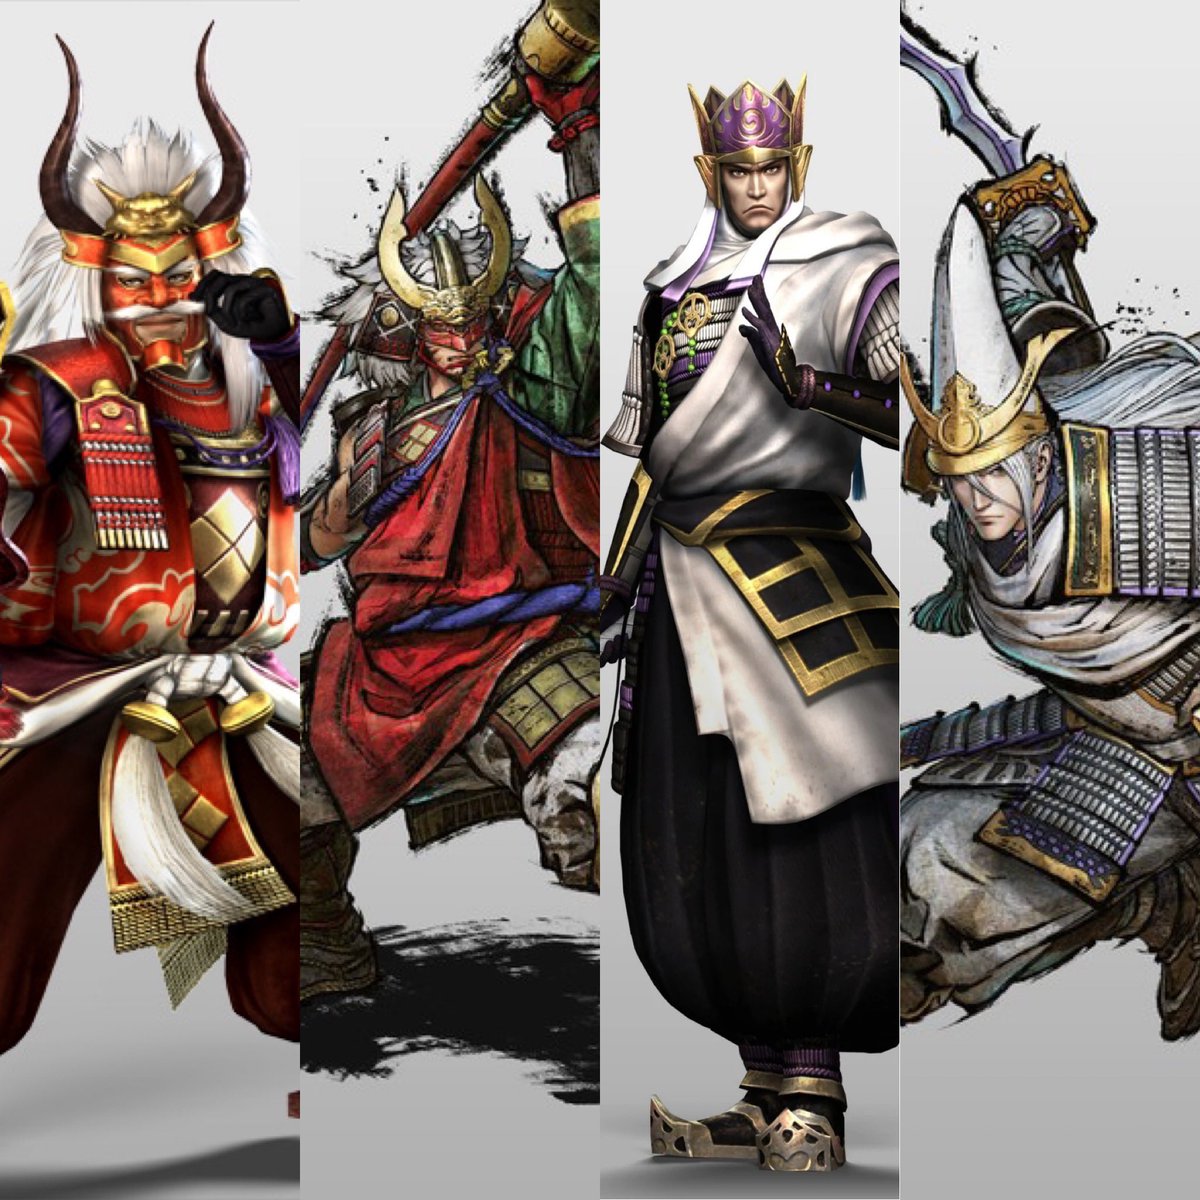 Shingen Takeda: we have an extremely good redesign for young Shingen but is he going to be an absolute chad like the one in 4? Will he retain his humor, his wisdom and his cunning?Kenshin Uesugi: the white hair was unexpected but I like it. This new design fits the "God of War"